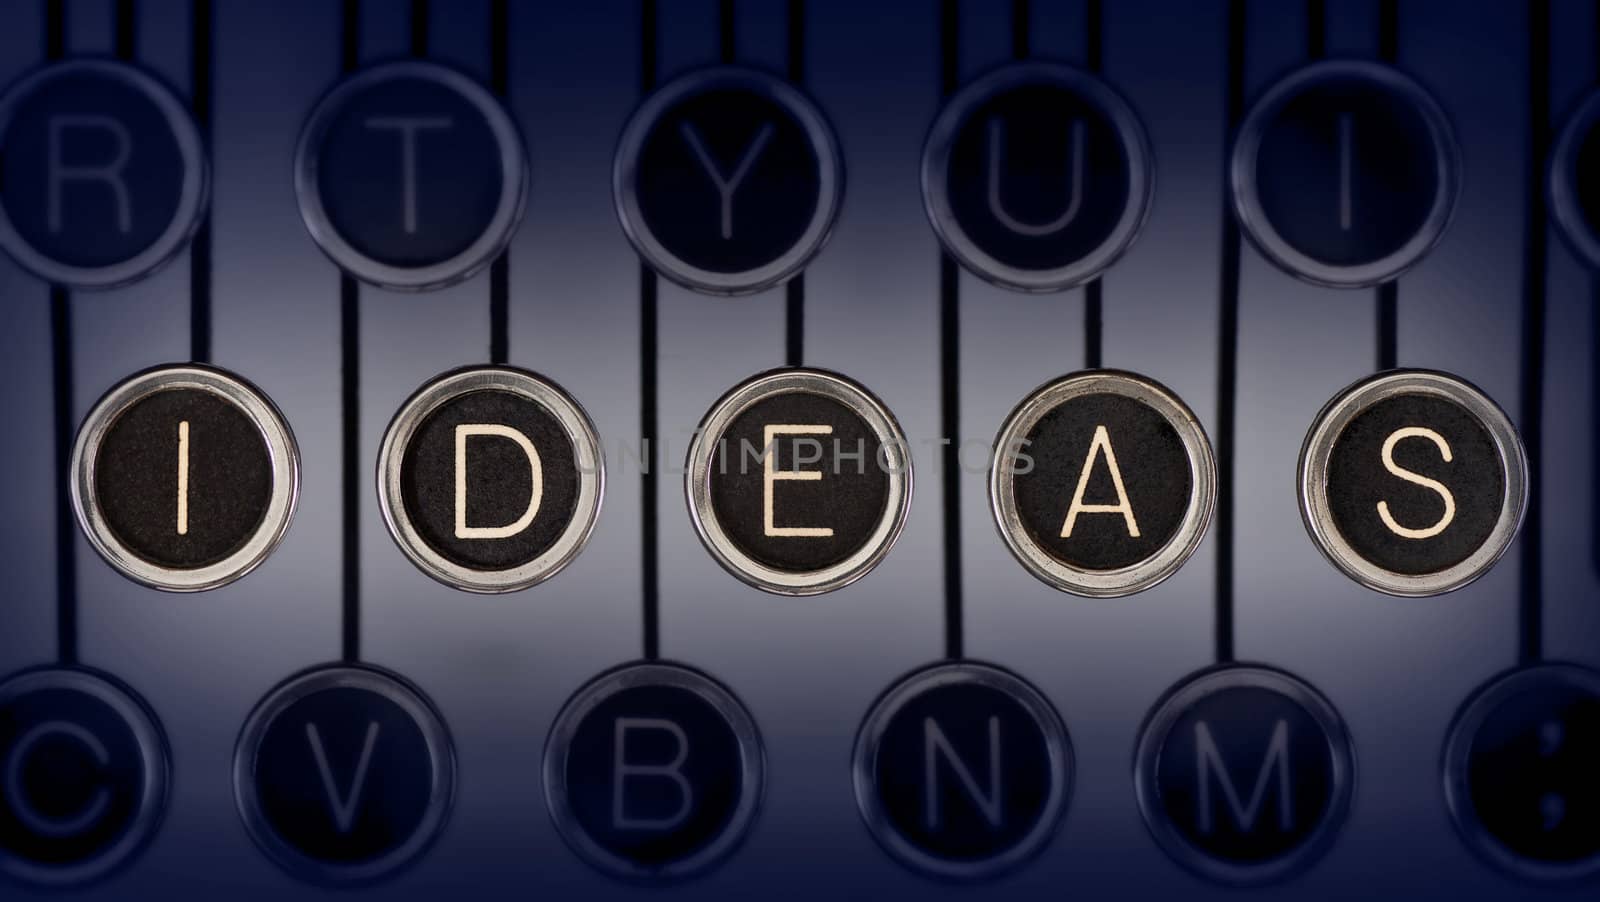 Close up of old typewriter keyboard with scratched chrome keys that spell out "IDEAS". Lighting and focus are centered on "IDEAS". 